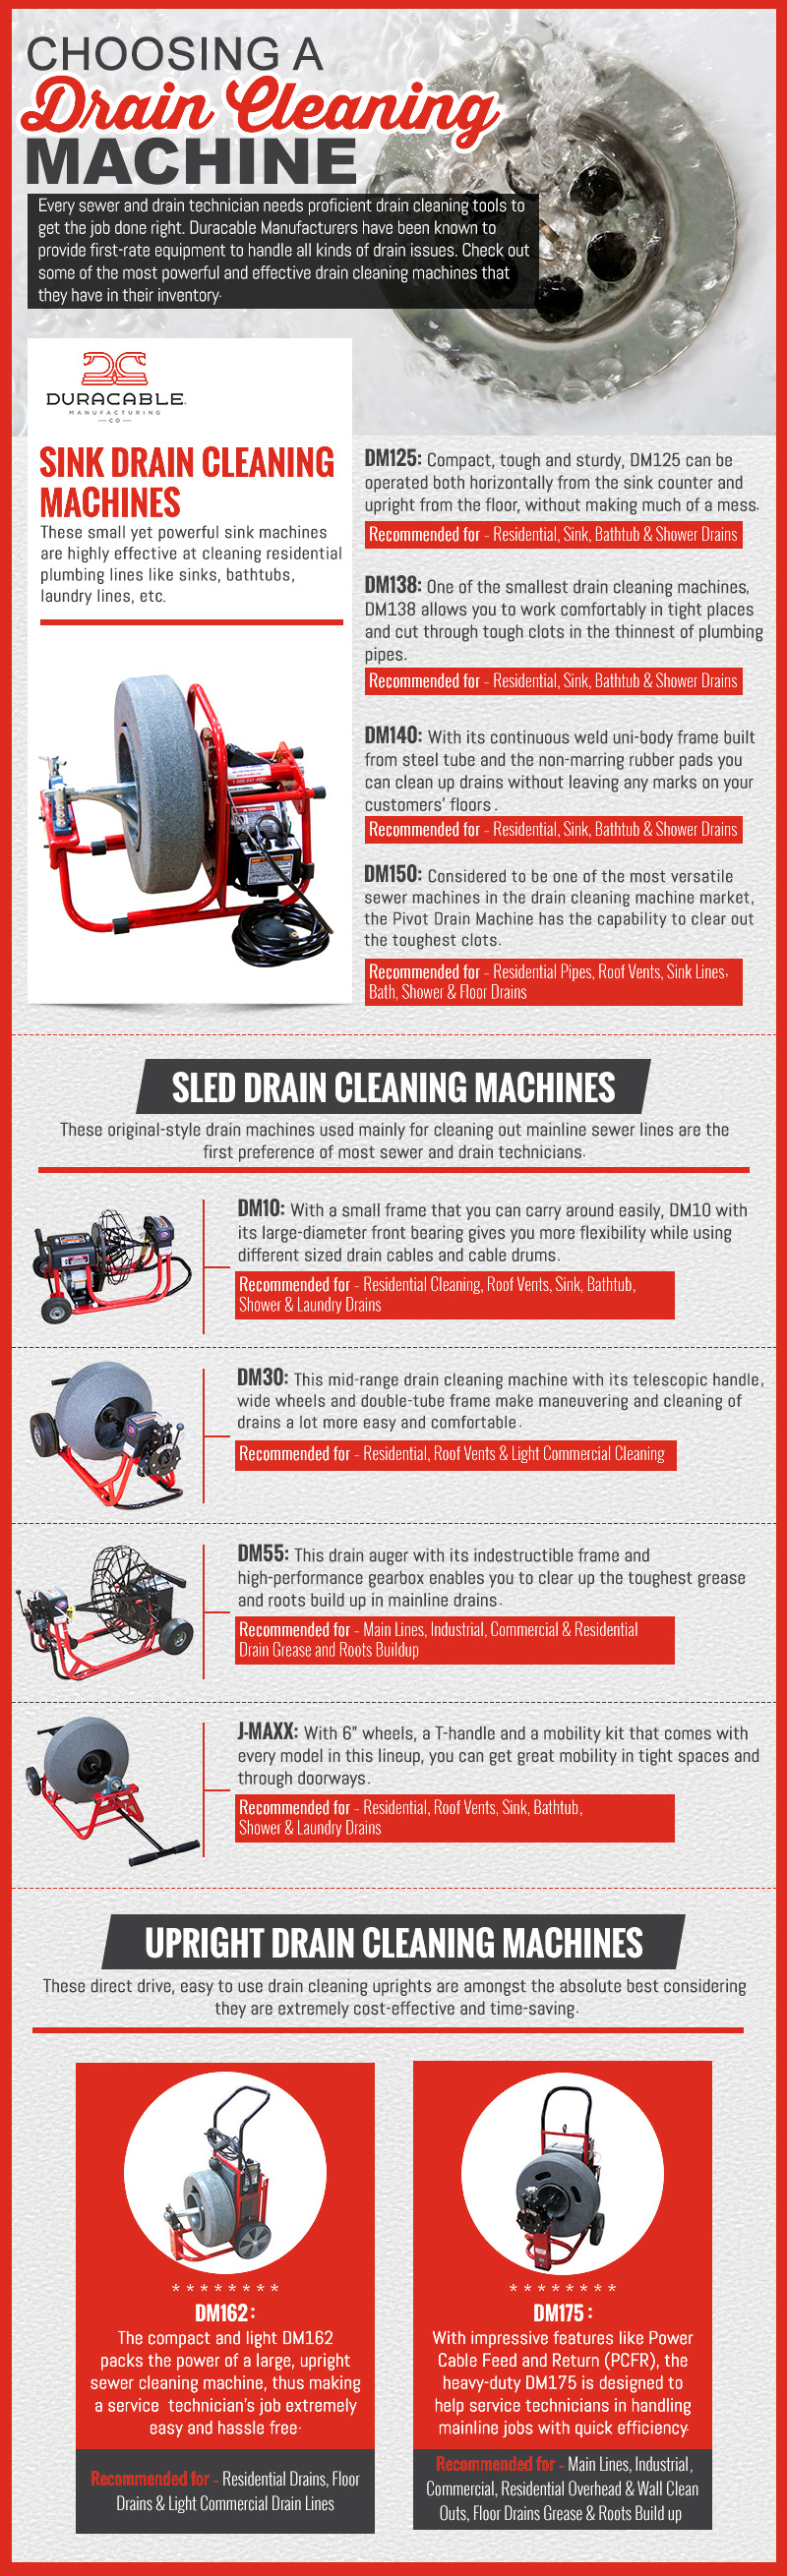 https://www.duracable.com/product_images/uploaded_images/duracable-choosing-a-drain-cleaning-machine1.jpg